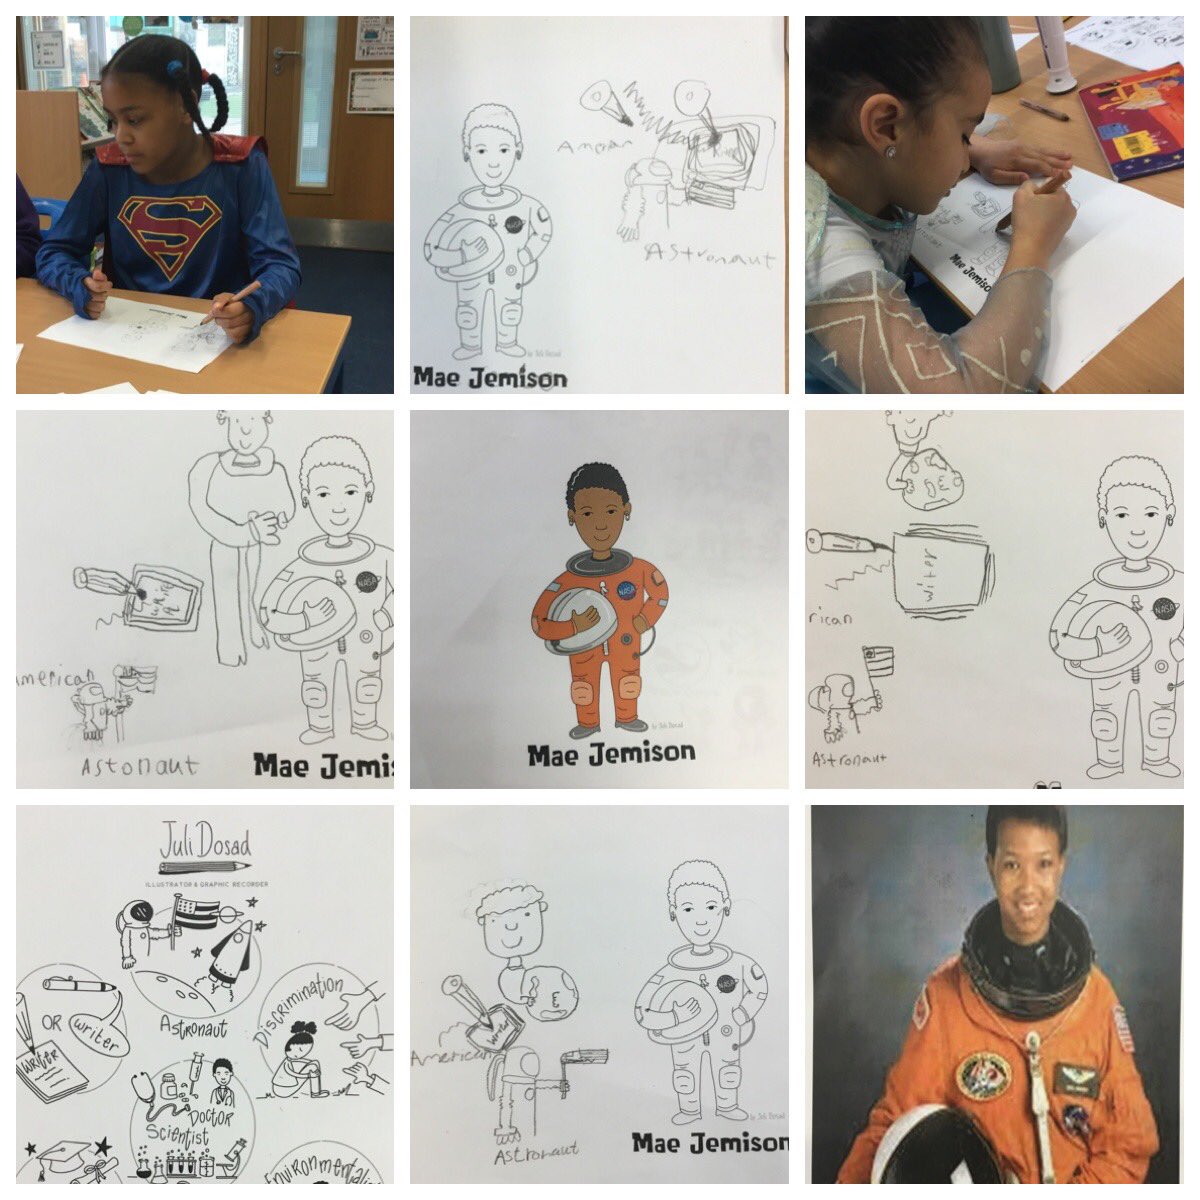 Redwood 1 really enjoyed being illustrators and drawing our ‘class hero’ @maejemison .Thank you @julidosad for an amazing ‘Doodle with Purpose’ workshop!